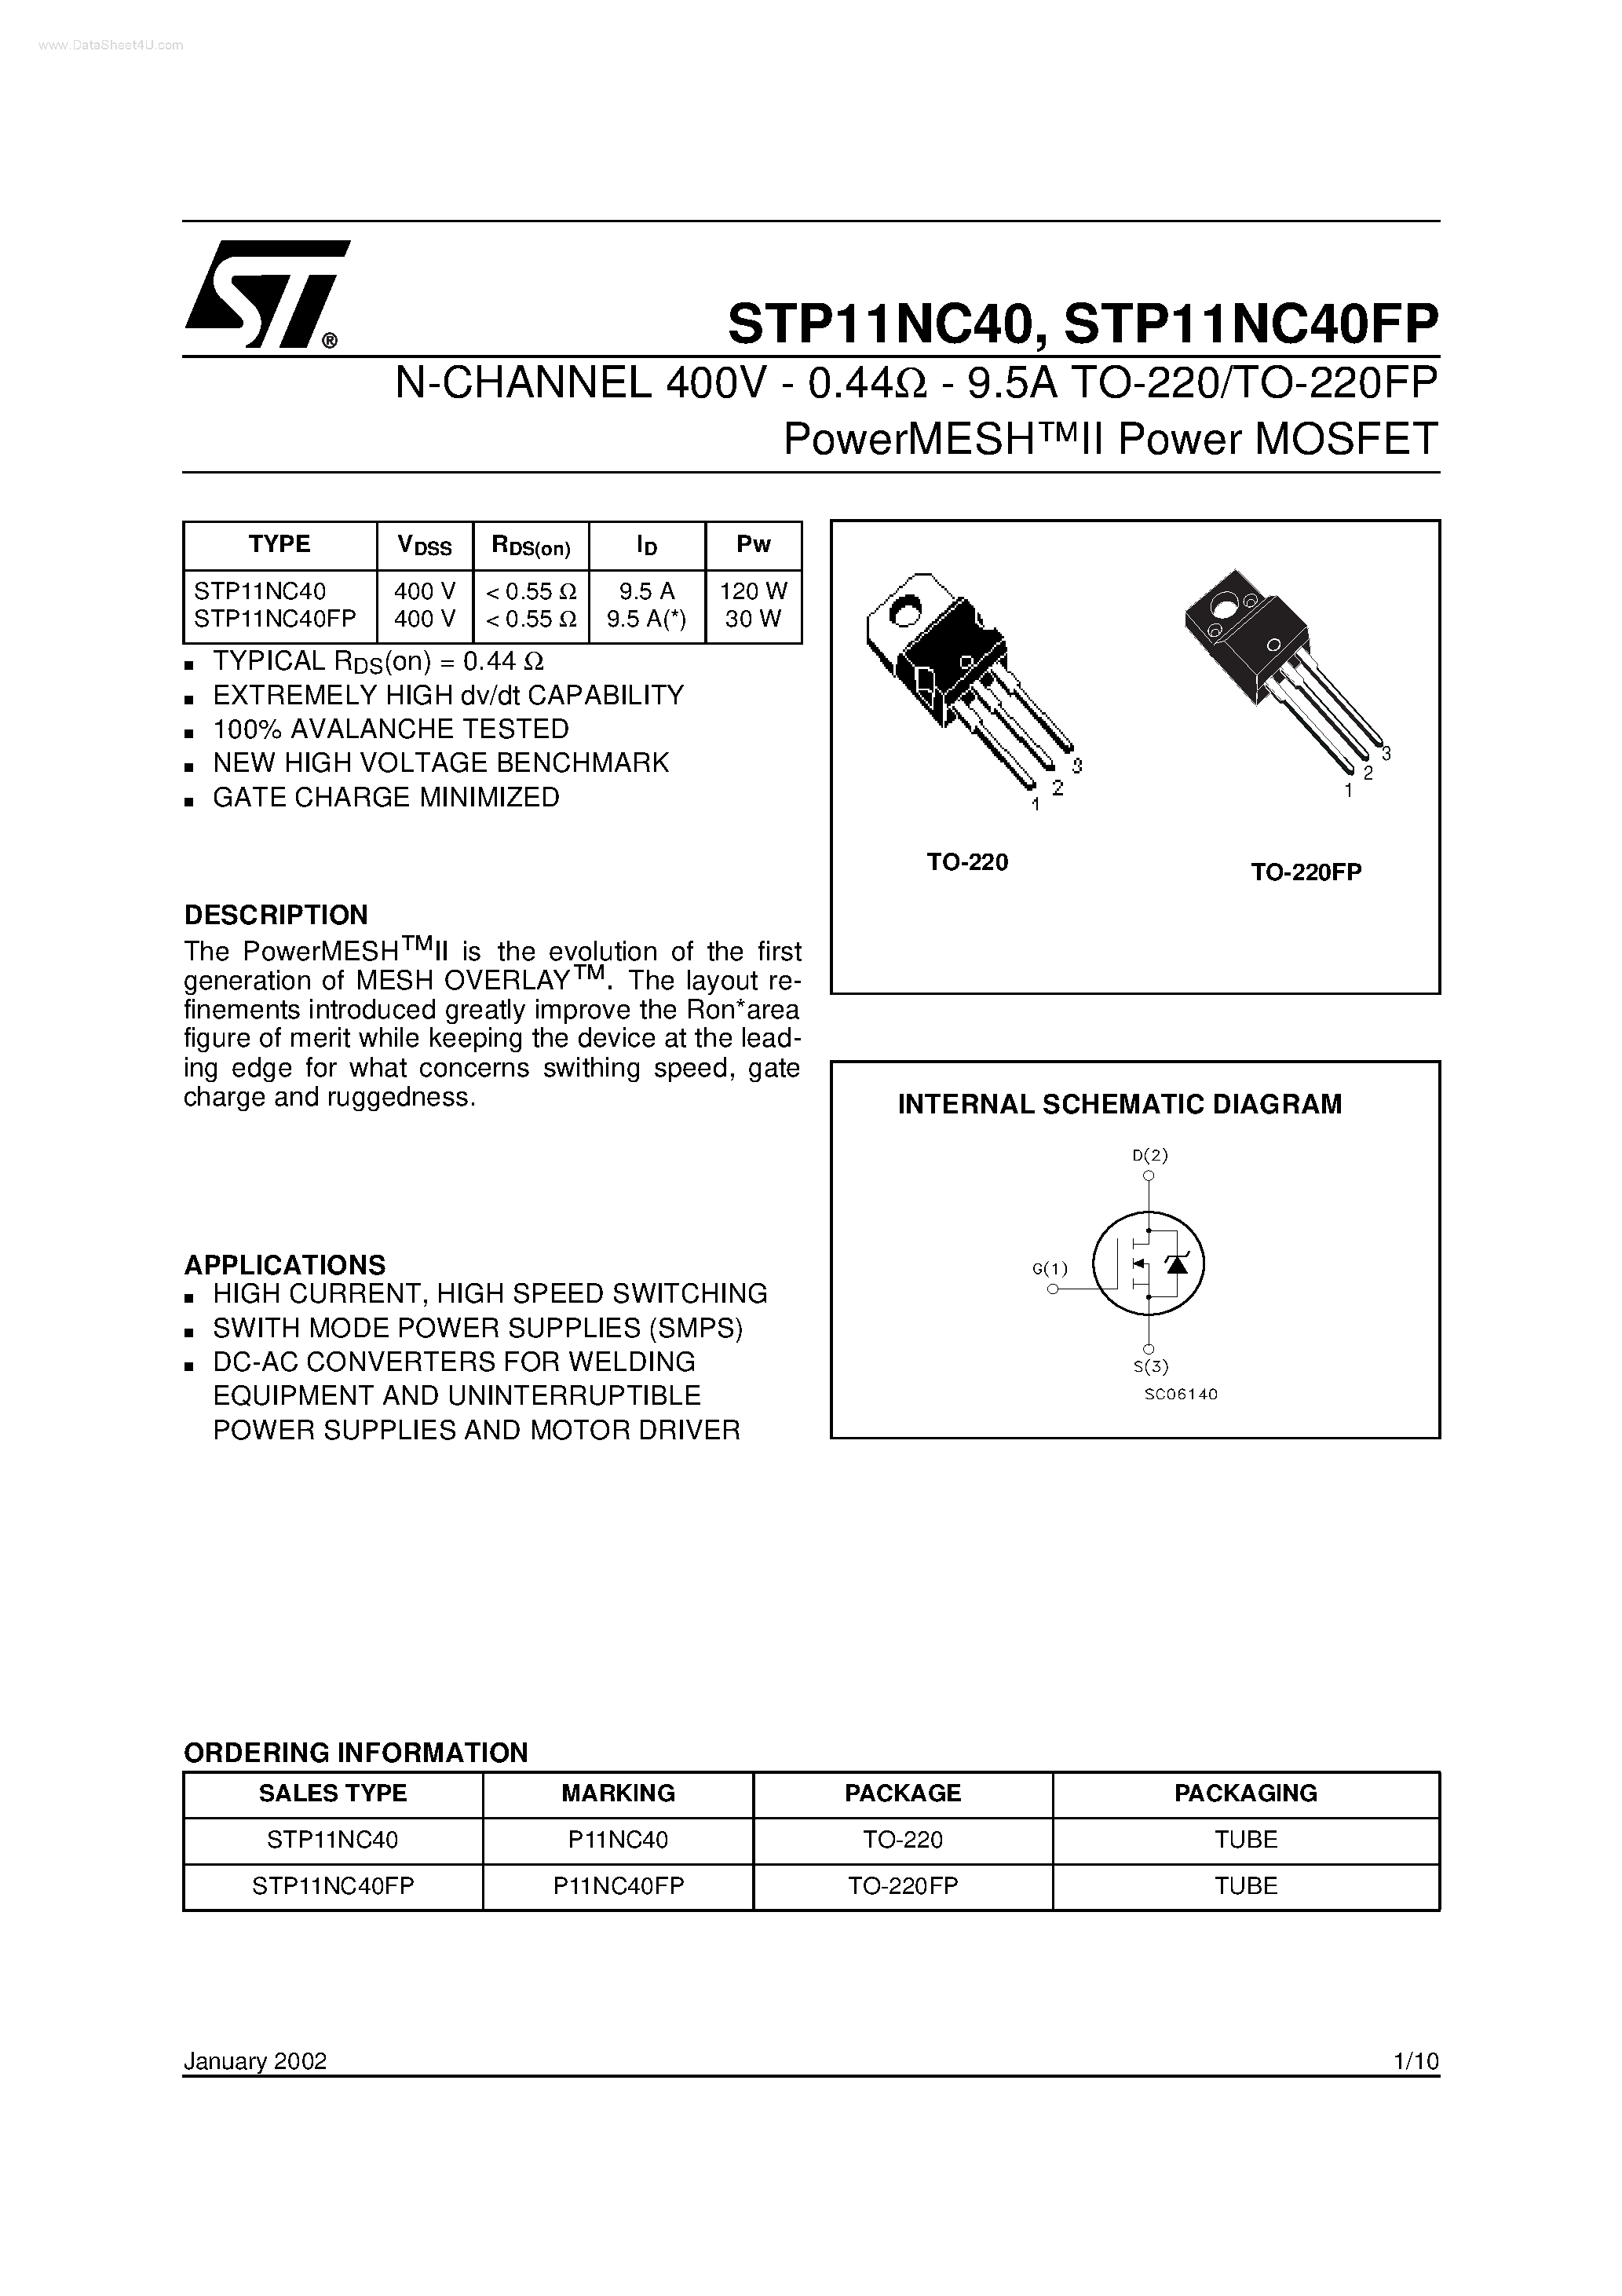 Datasheet STP11NC40 - N-CHANNEL Power MOSFET page 1